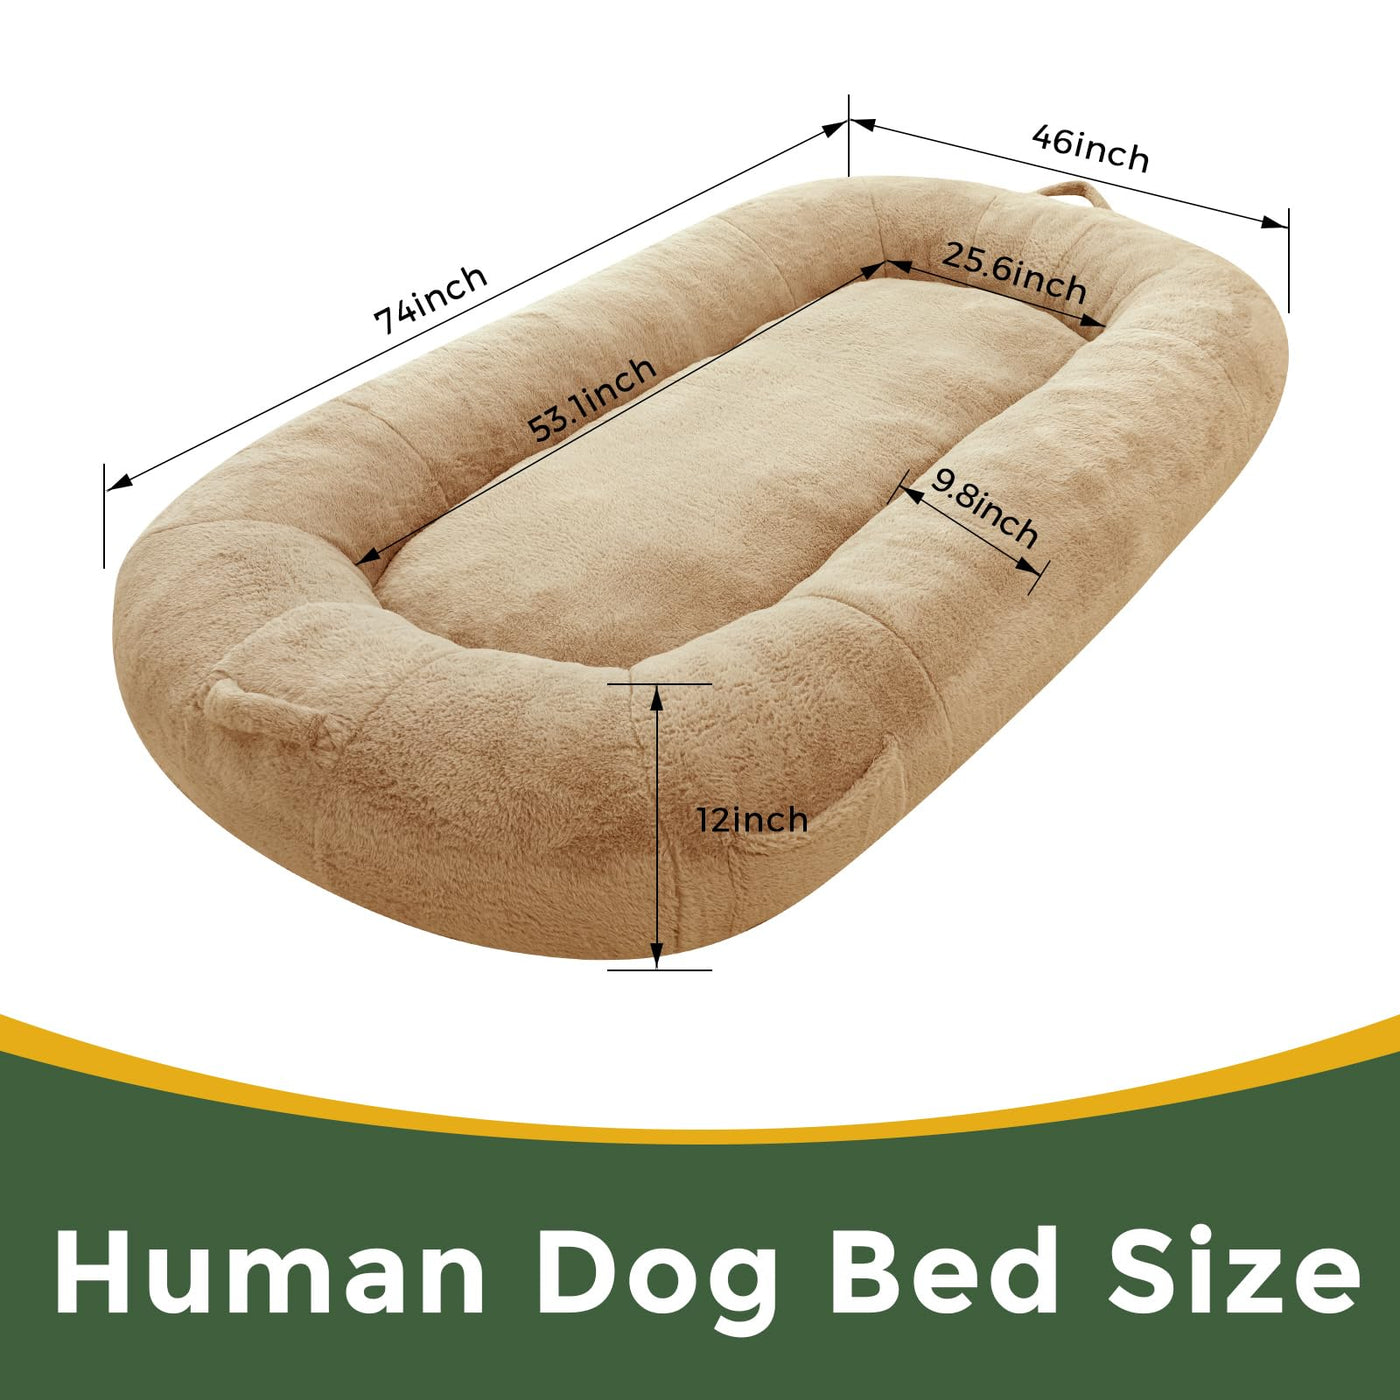 MAXYOYO Giant Dog Bed for Human, Sherpa Dog Bed for Humans Size Fits You and Pets, Khaki